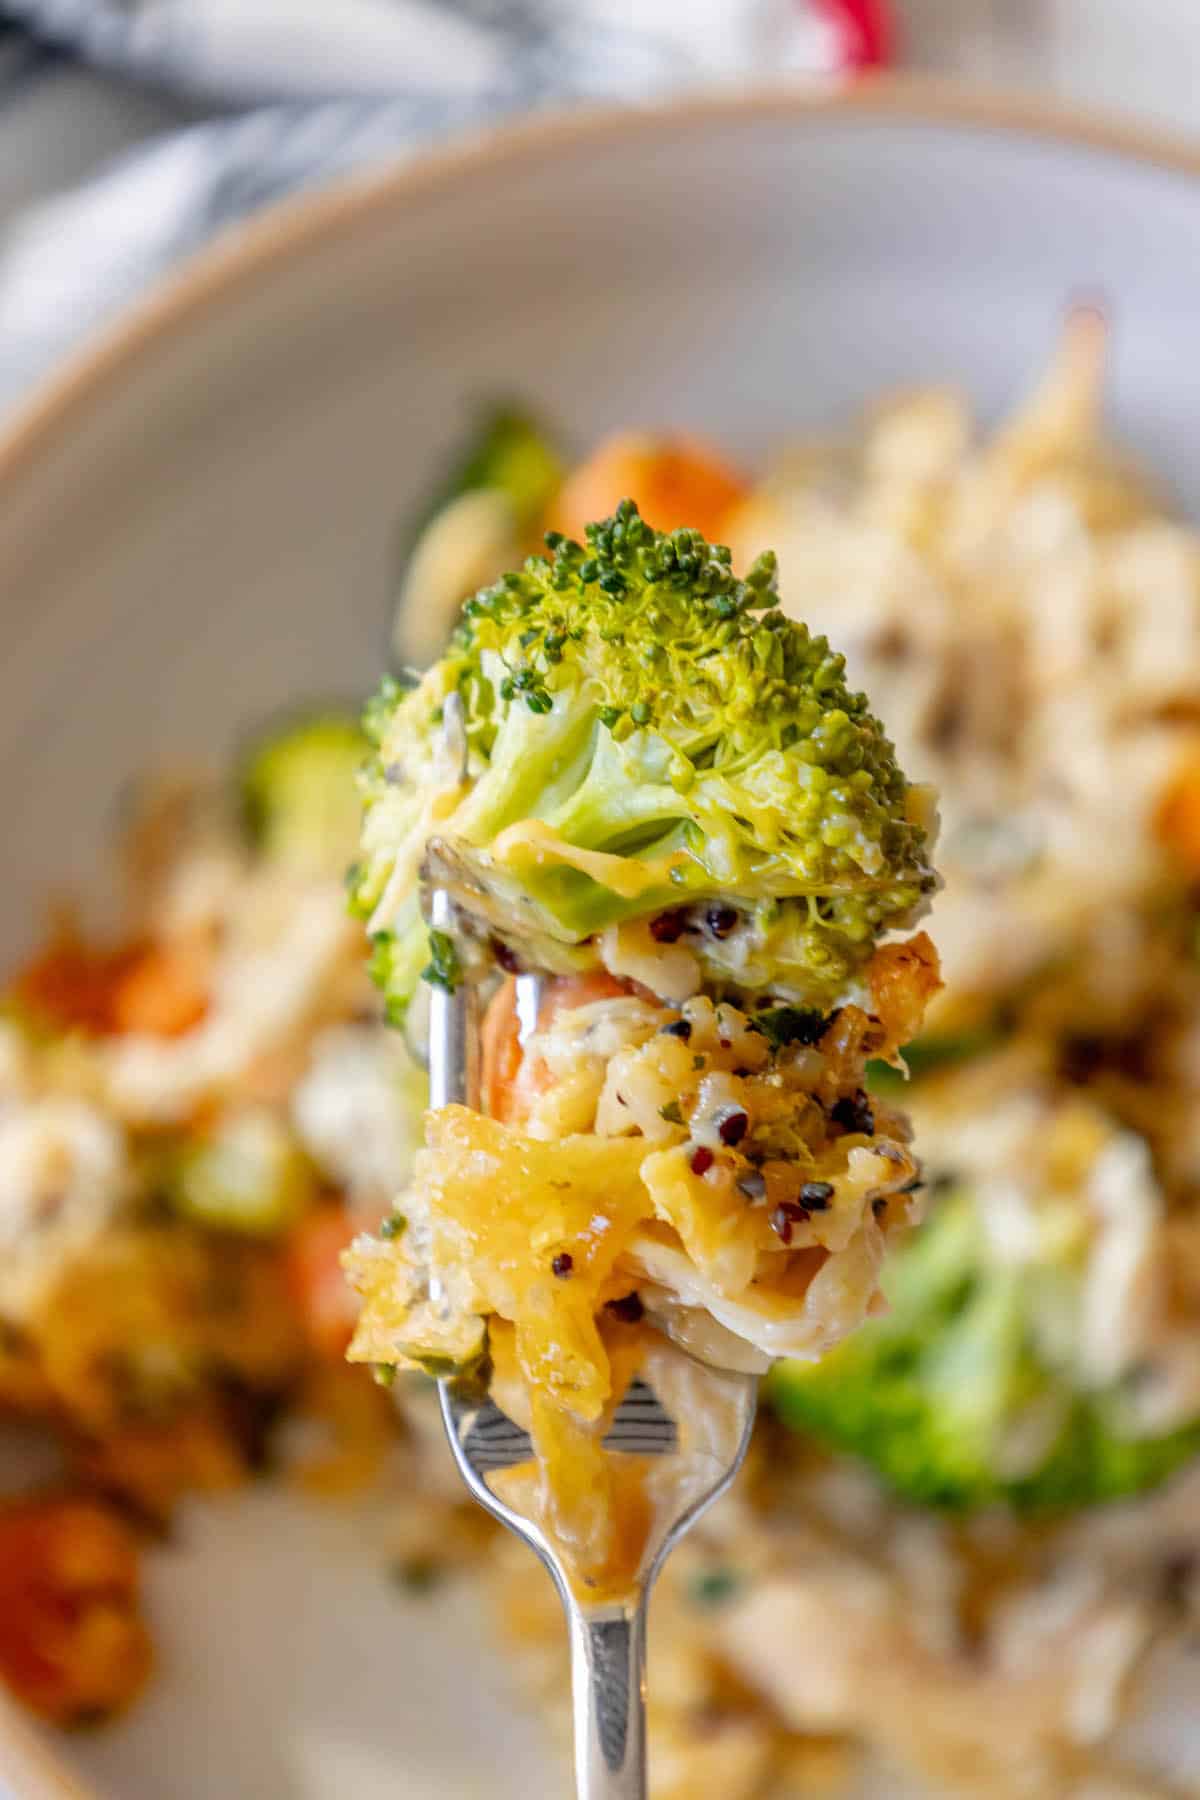 A cheesy fork full of broccoli and carrots on a plate.